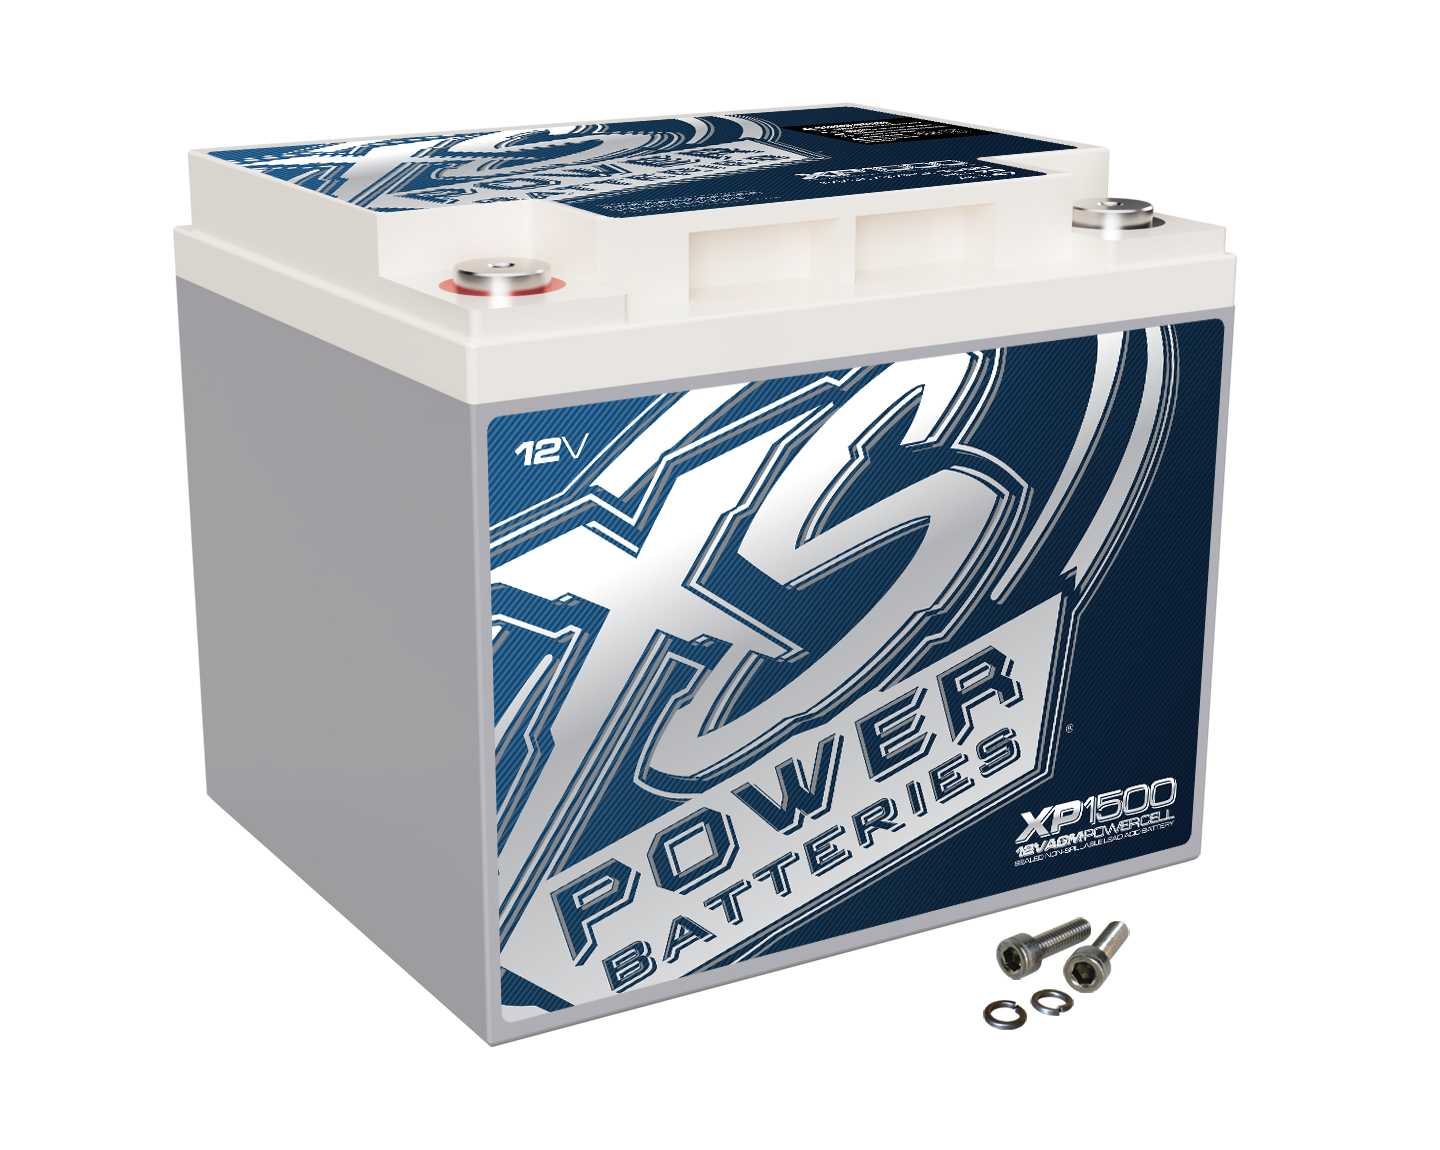 XS Power XP1500 Battery 12V 1500 Max Amps Questions & Answers